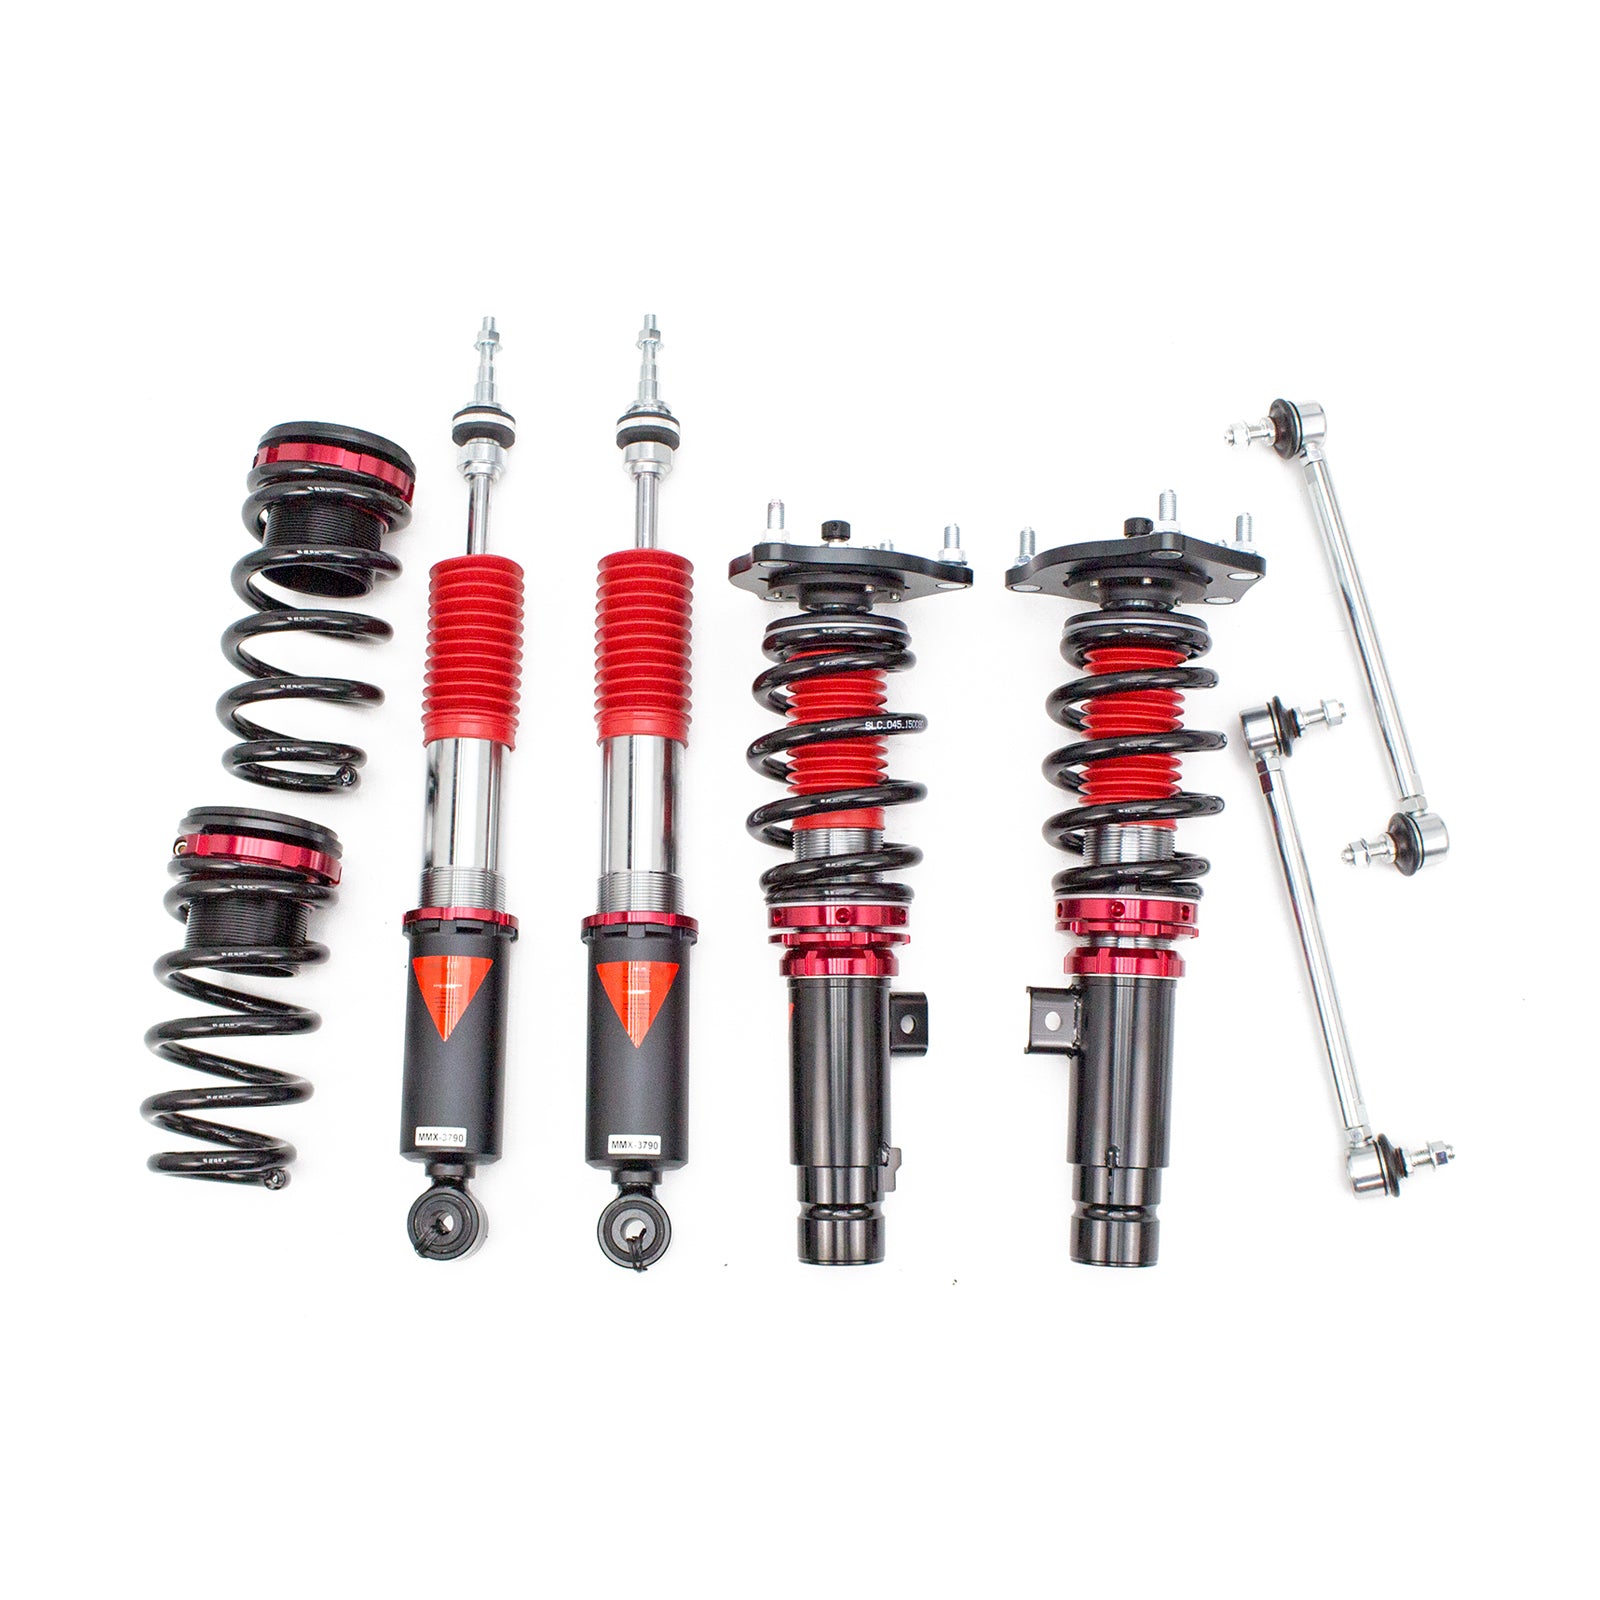 MMX3790-54-B MAXX Coilovers Lowering Kit, Fully Adjustable, Ride Height, 40 Clicks Rebound Settings, Honda Accord 2018+UP